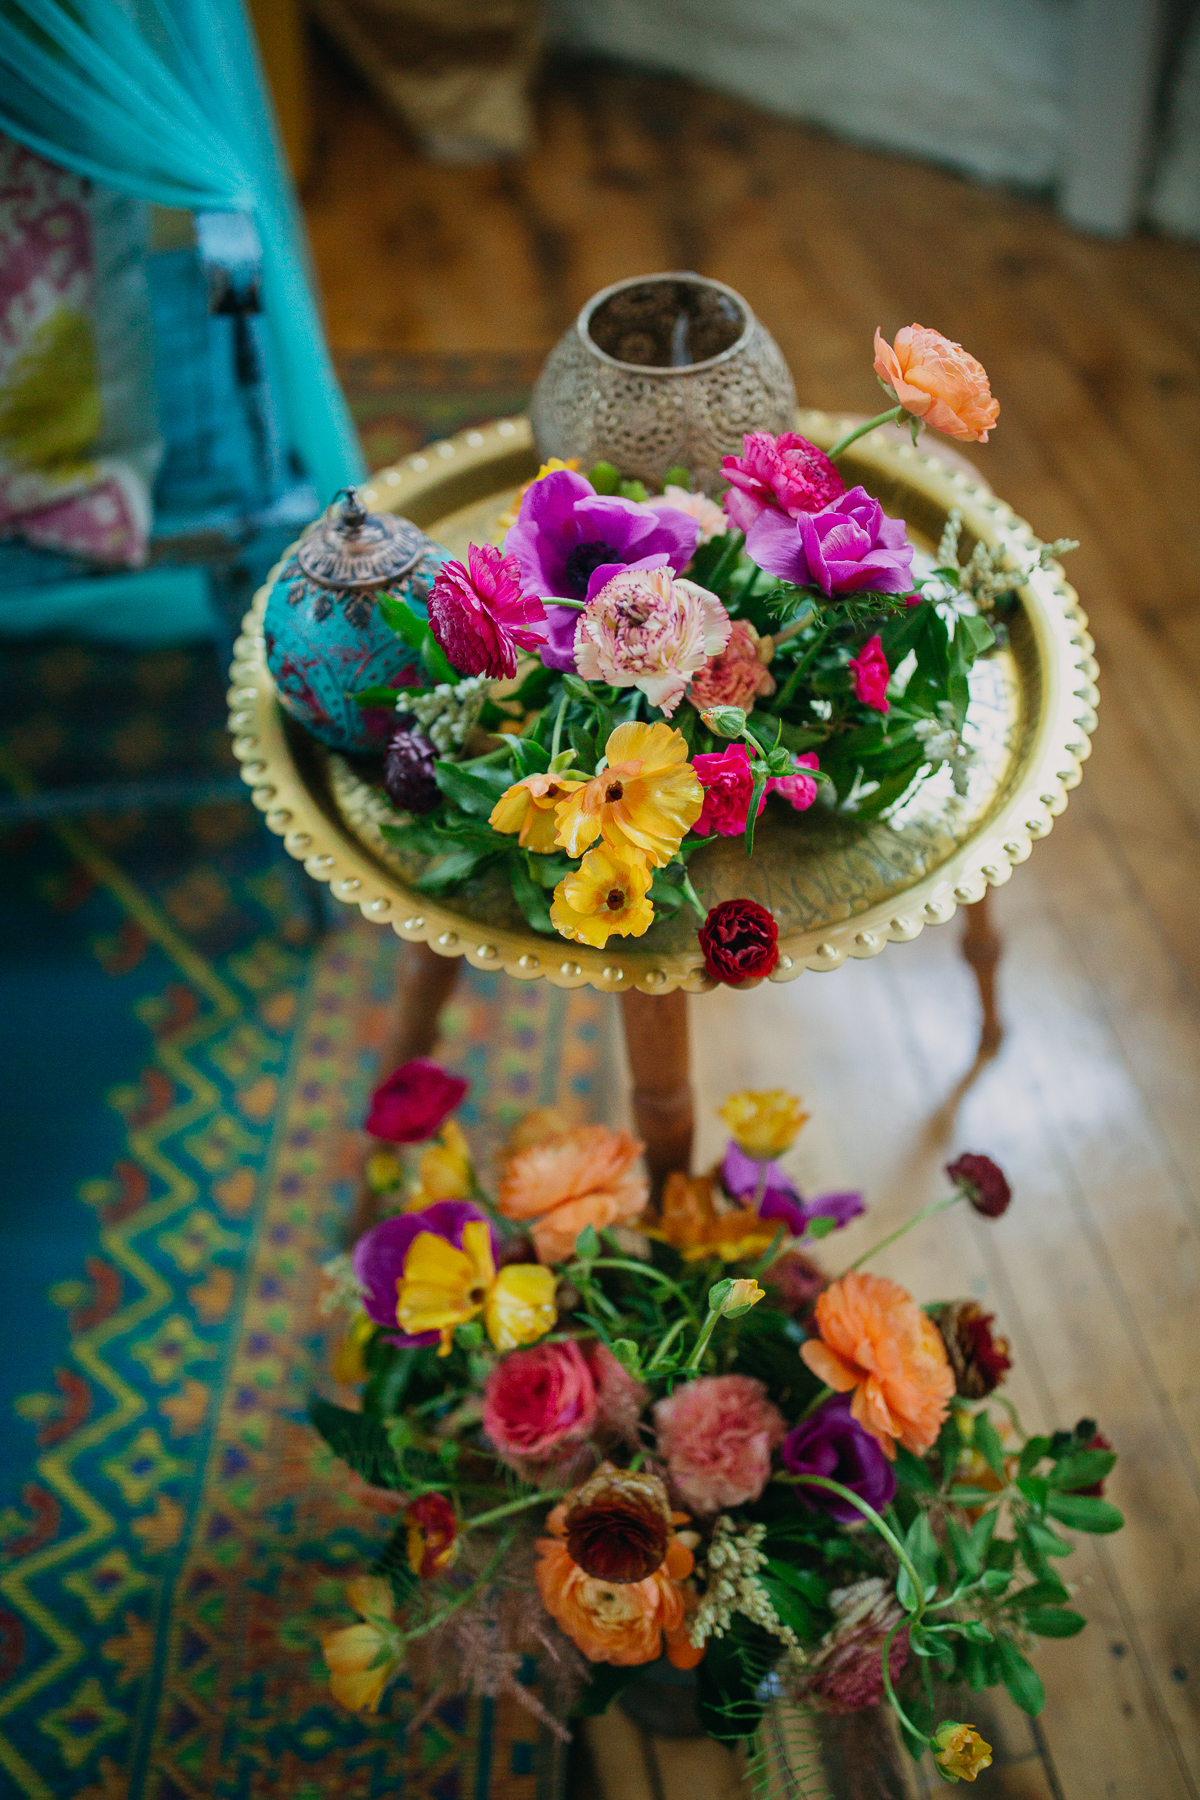 Bright flowers, brass plates and lanterns for decoration.